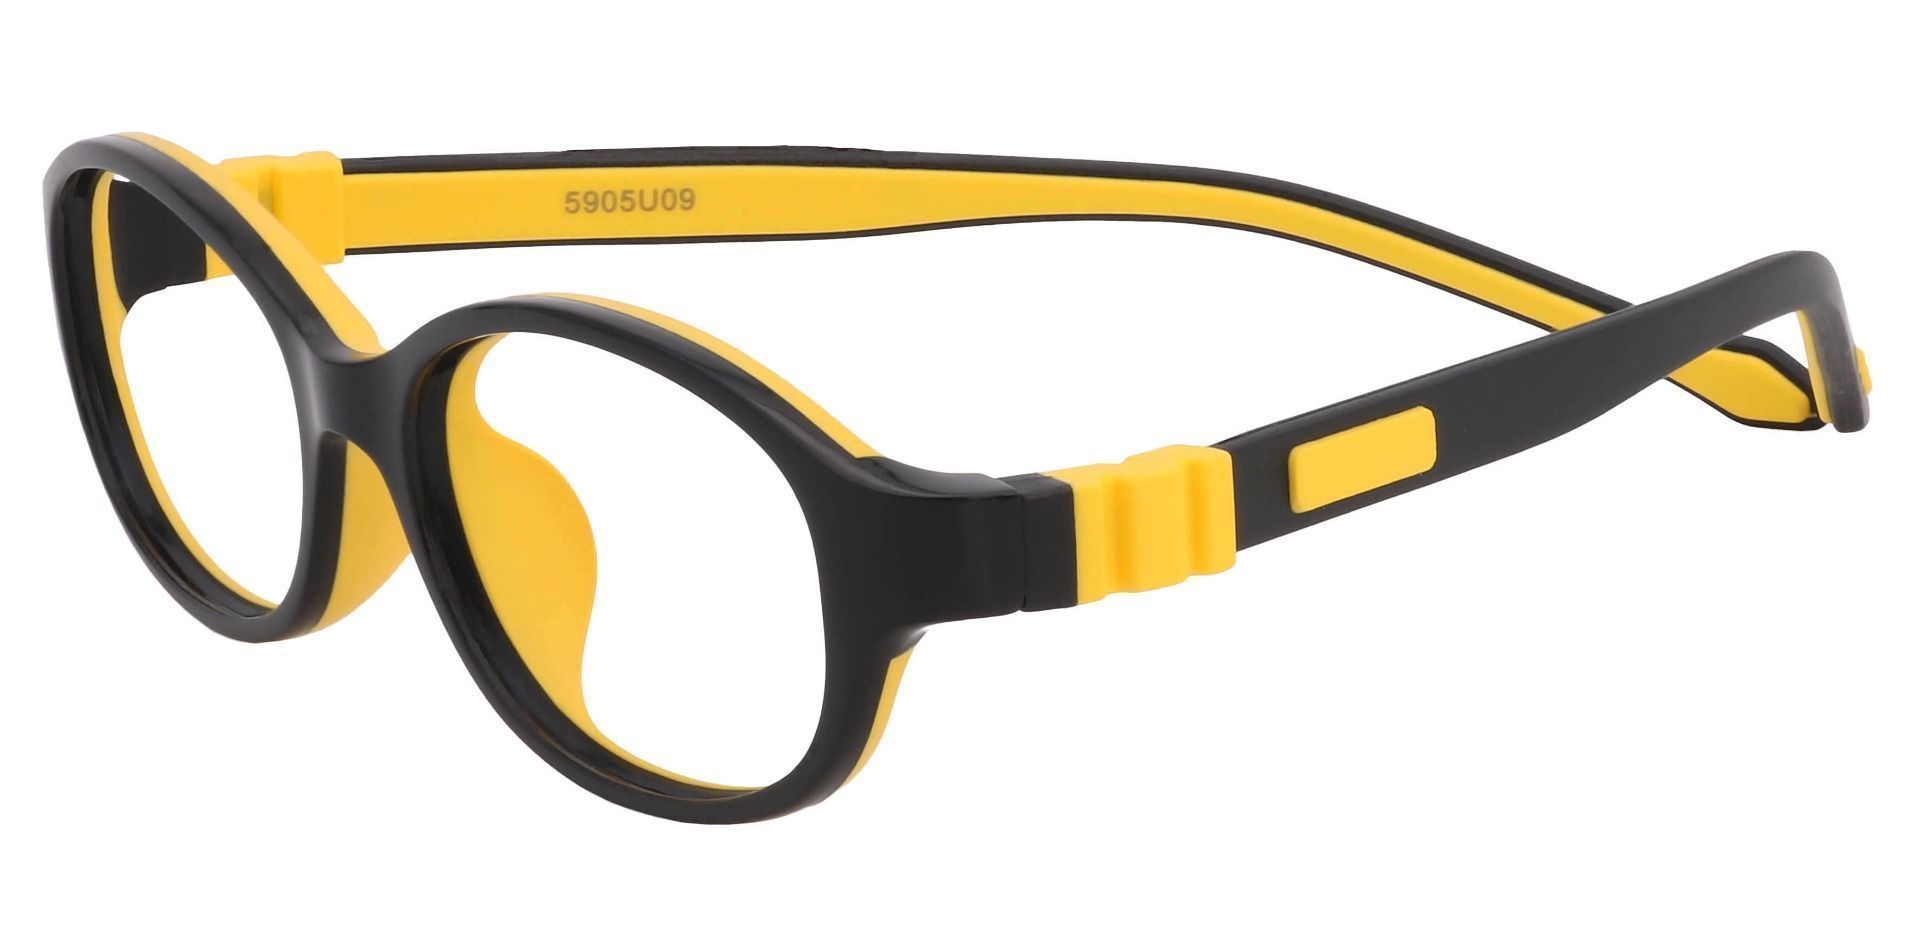 Stone Oval Prescription Glasses - The Frame Is Black And Yellow